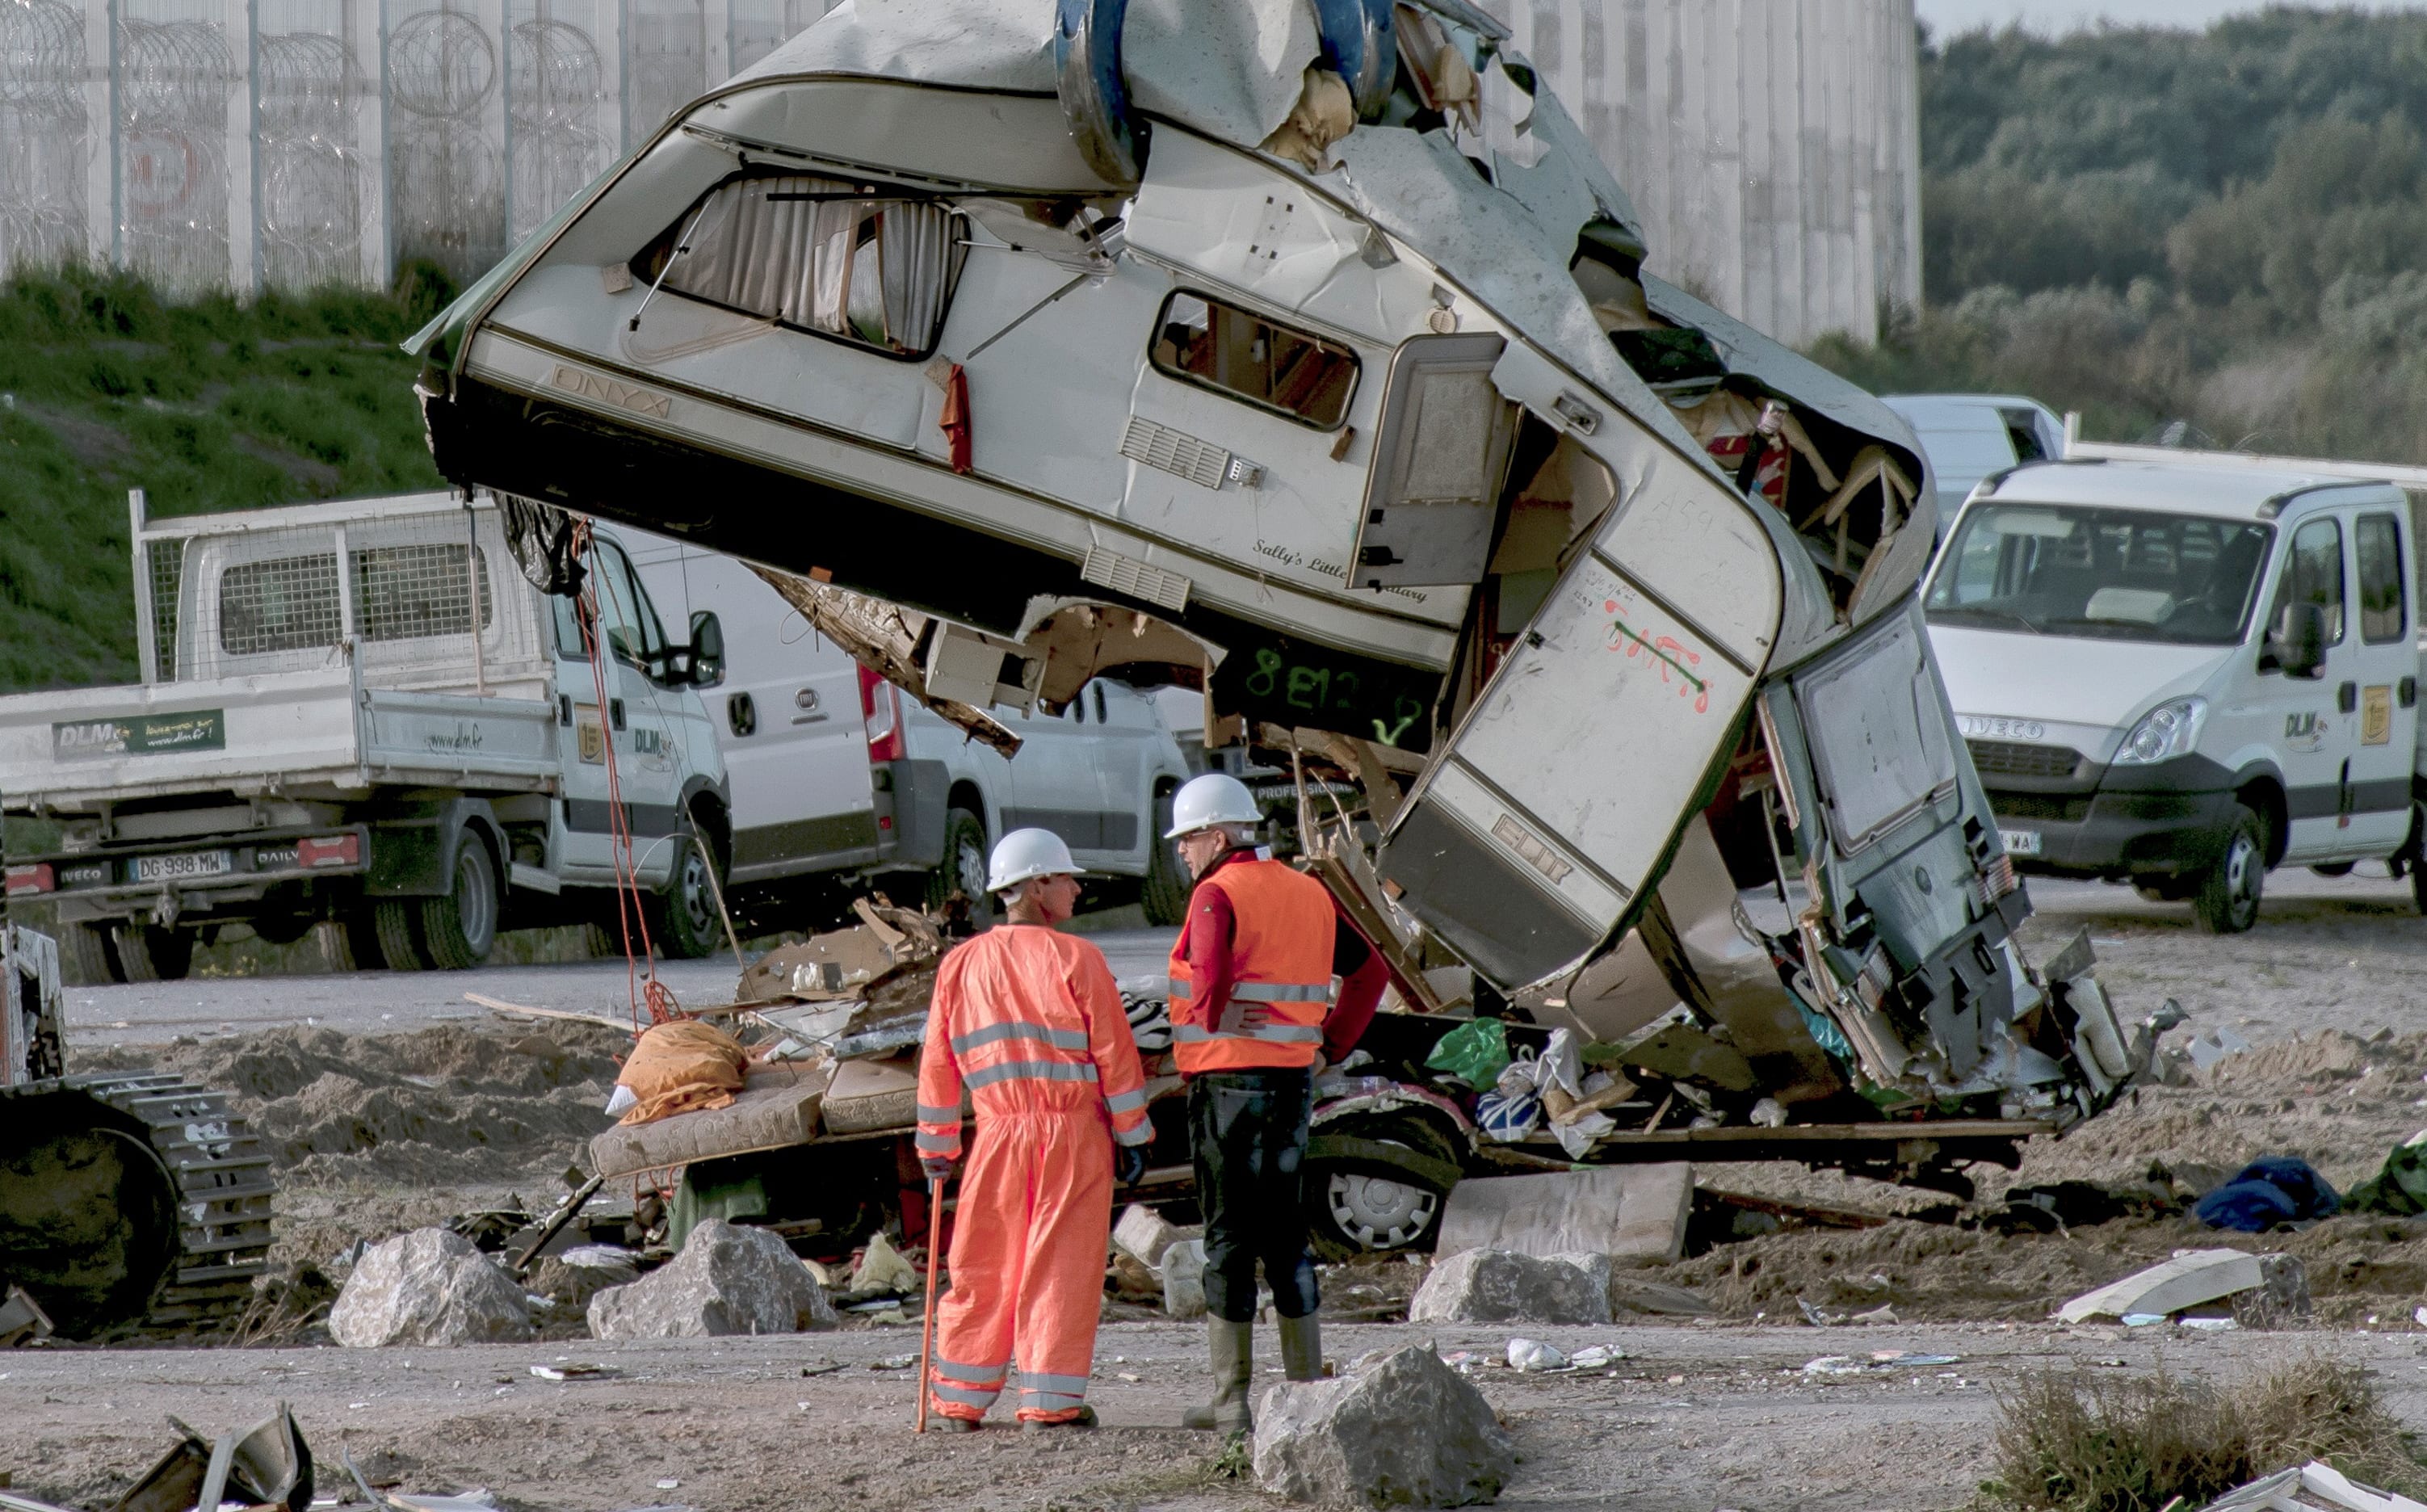 Workers watch as a crane destroys a caravan, once used as a makeshift shelter, at the site of the "jungle" migrant camp in Calais, northern France.